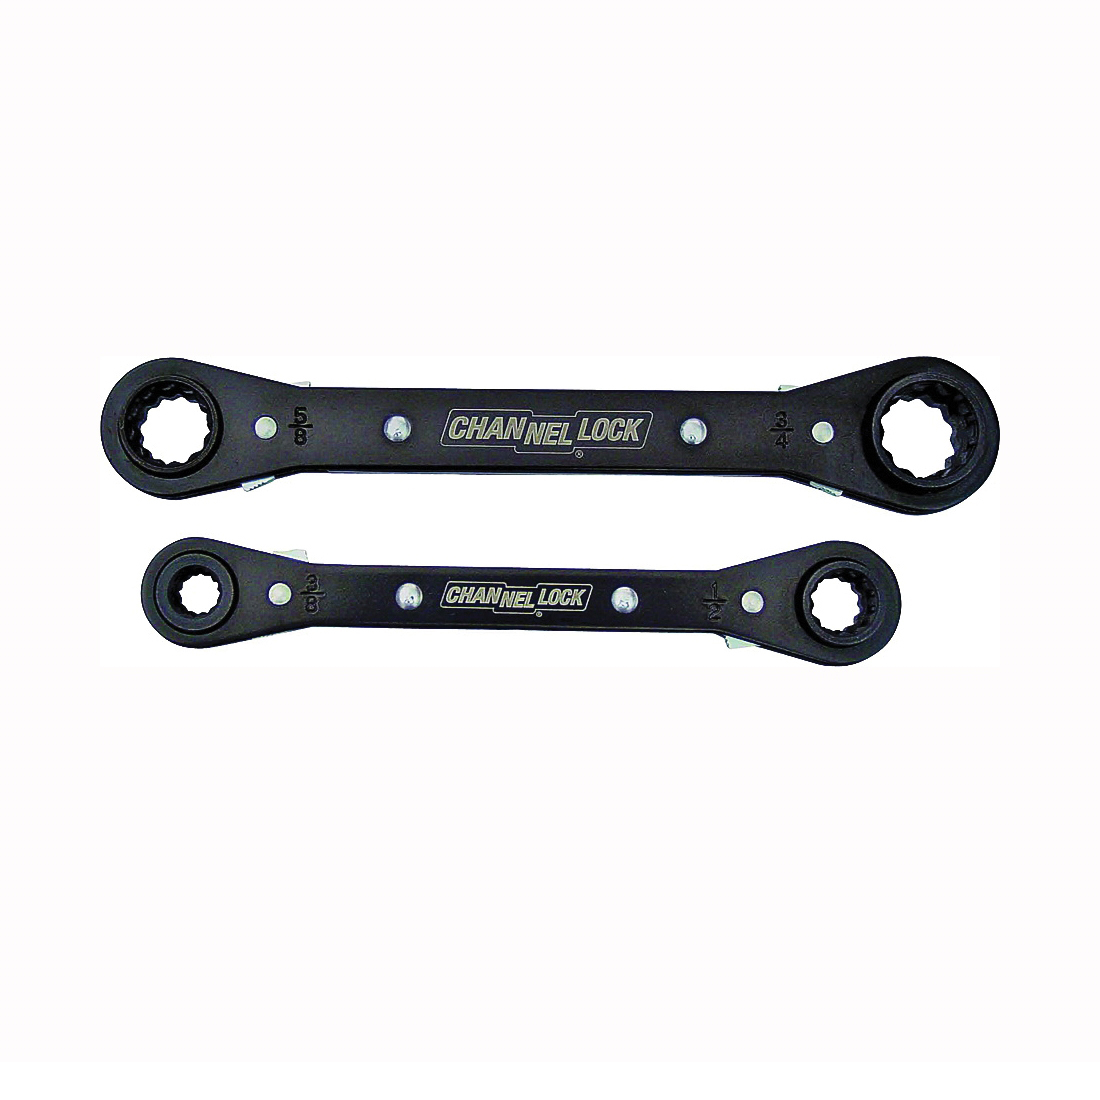 CHANNELLOCK 841S Wrench Set, 2-Piece, Steel, Black, Specifications: SAE Measurement